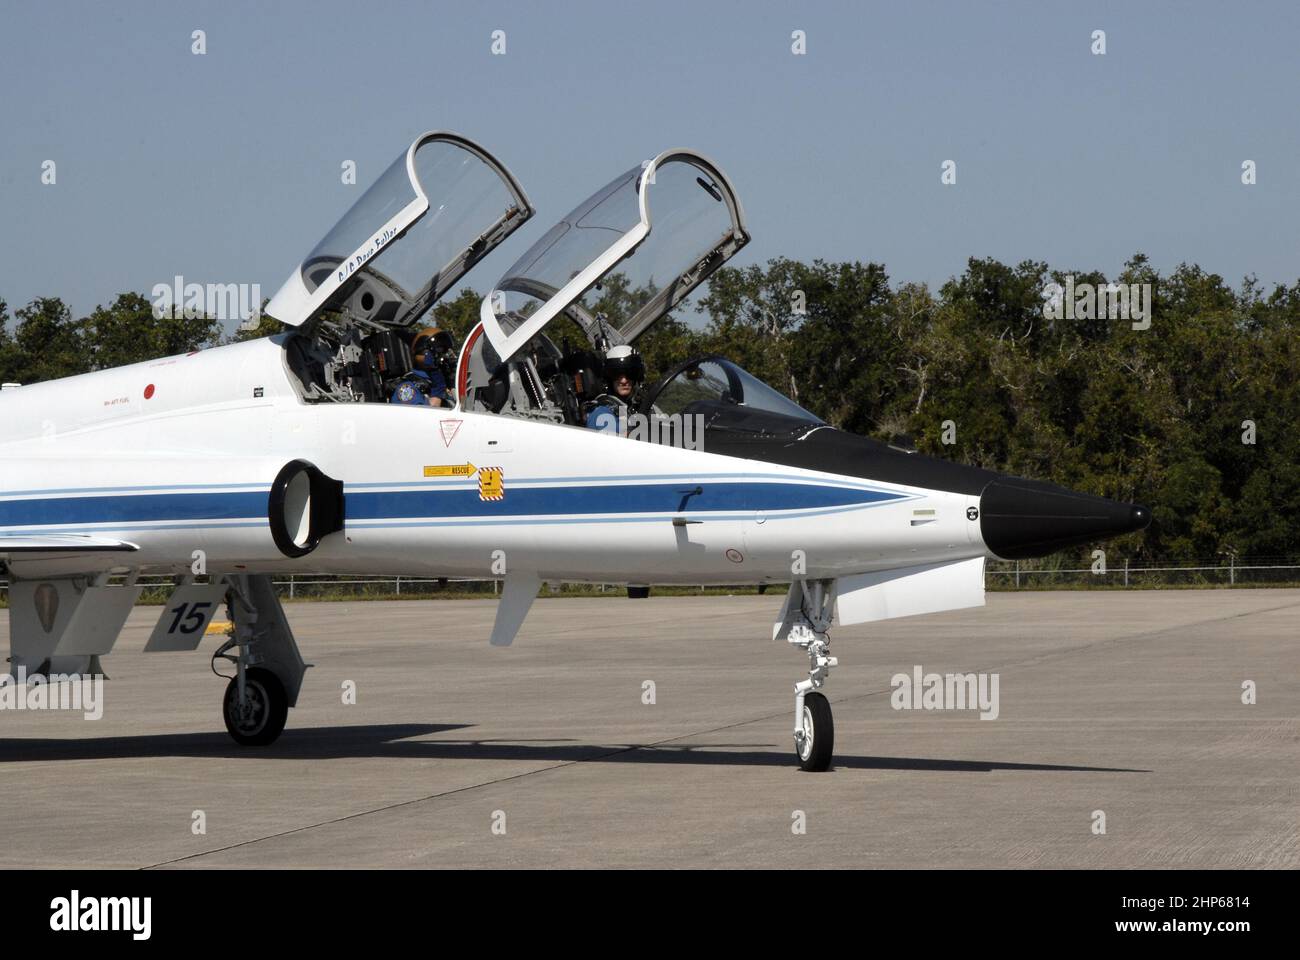 STS-129 Commander Charles O. Hobaugh pilots a T-38 jet to a stop at the Shuttle Landing Facility at NASA's Kennedy Space Center in Florida ca. 2009 Stock Photo